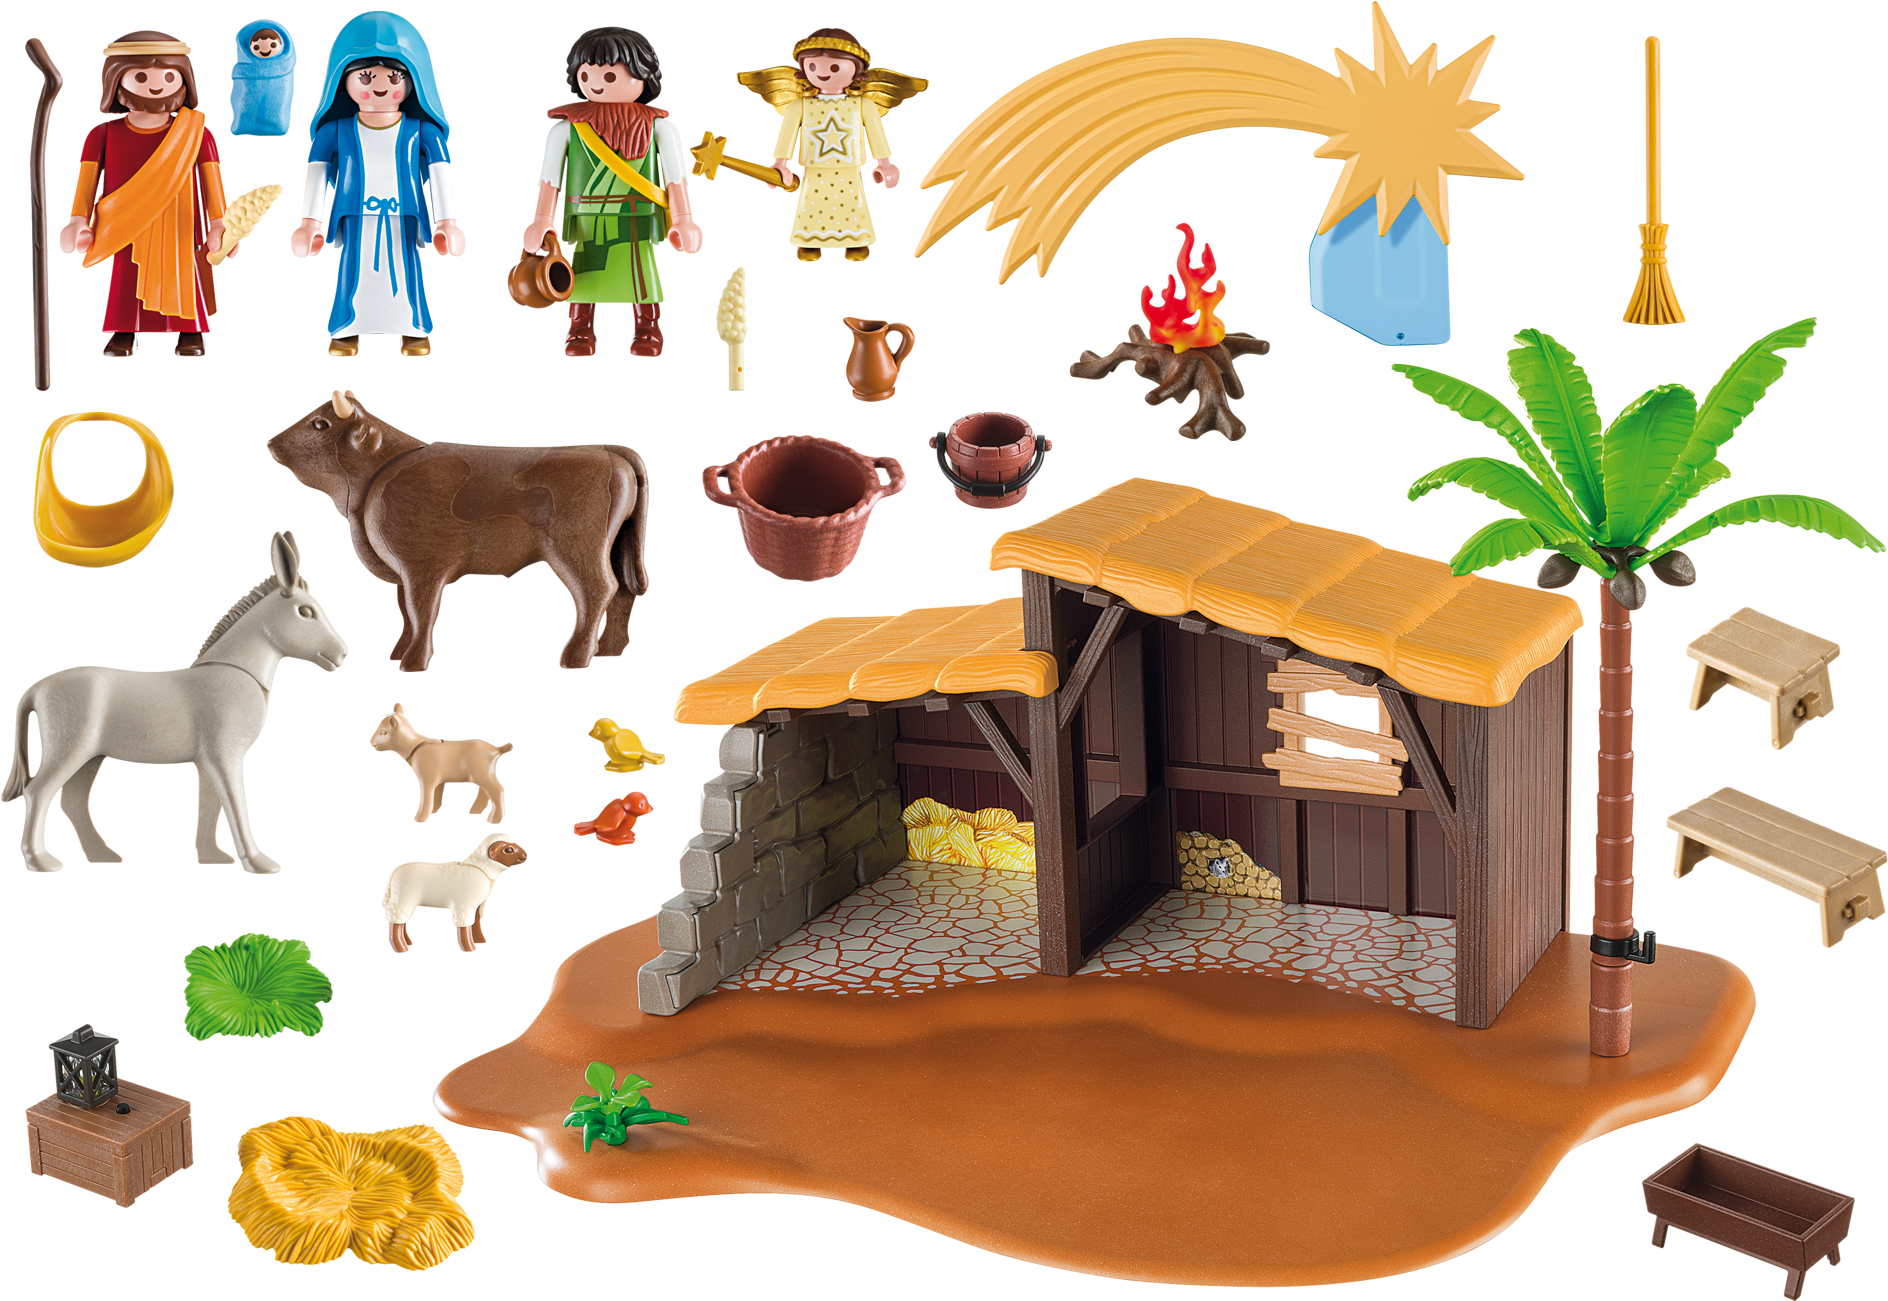 Nativity Stable For Kids - Playmobil 5588 Nativity Stable With Manger Building (2000x1400)